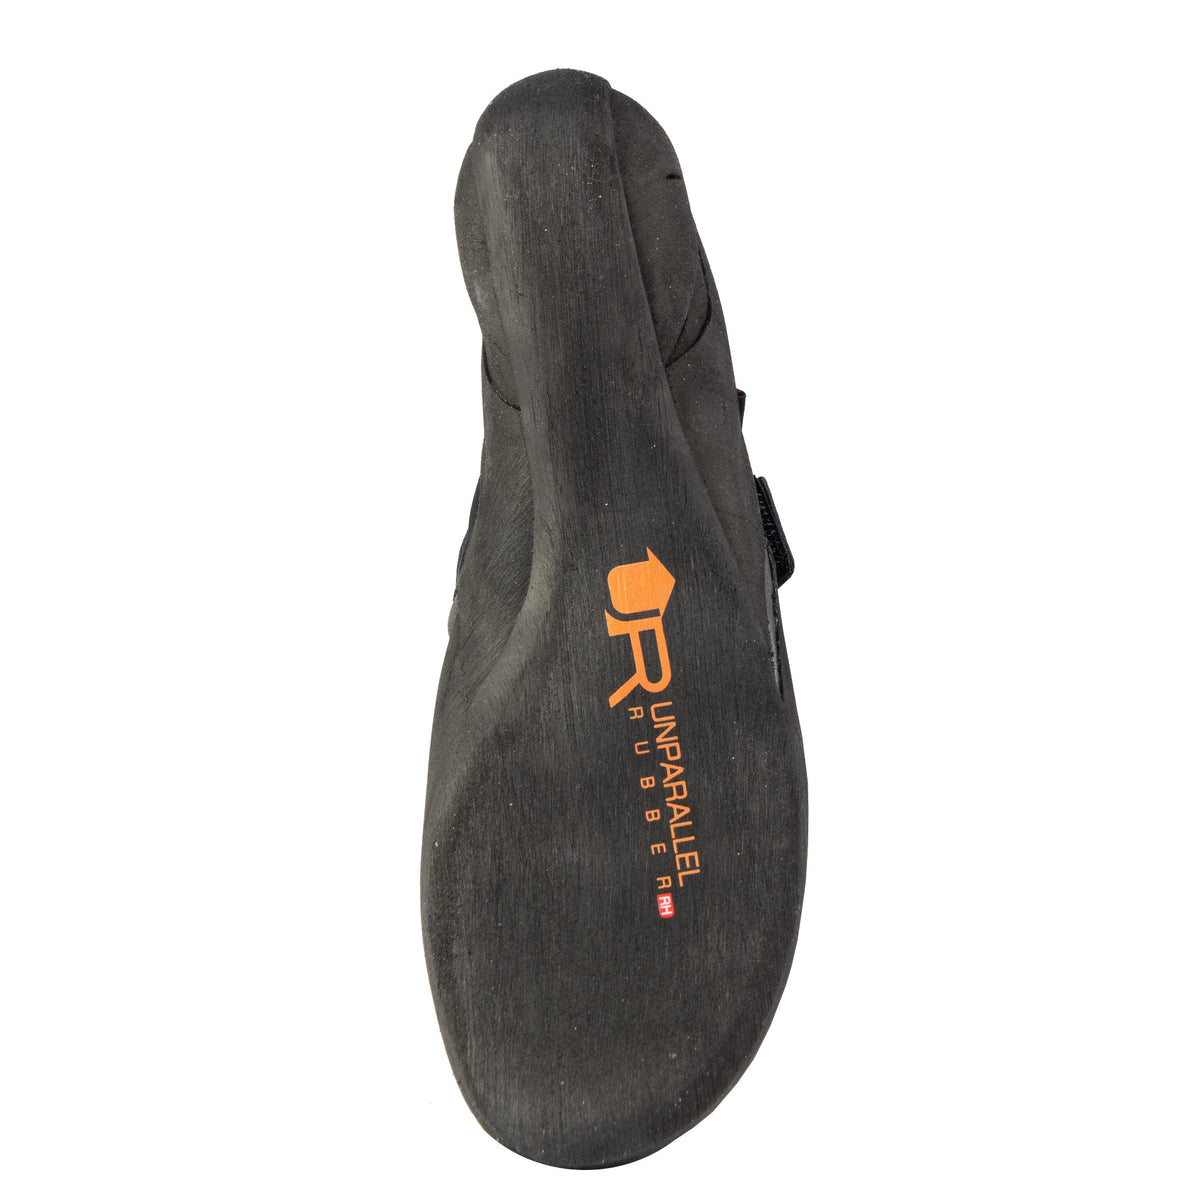 Sole view of the Unparallel Regulus Climbing shoe showing the large orange logo and RH in red